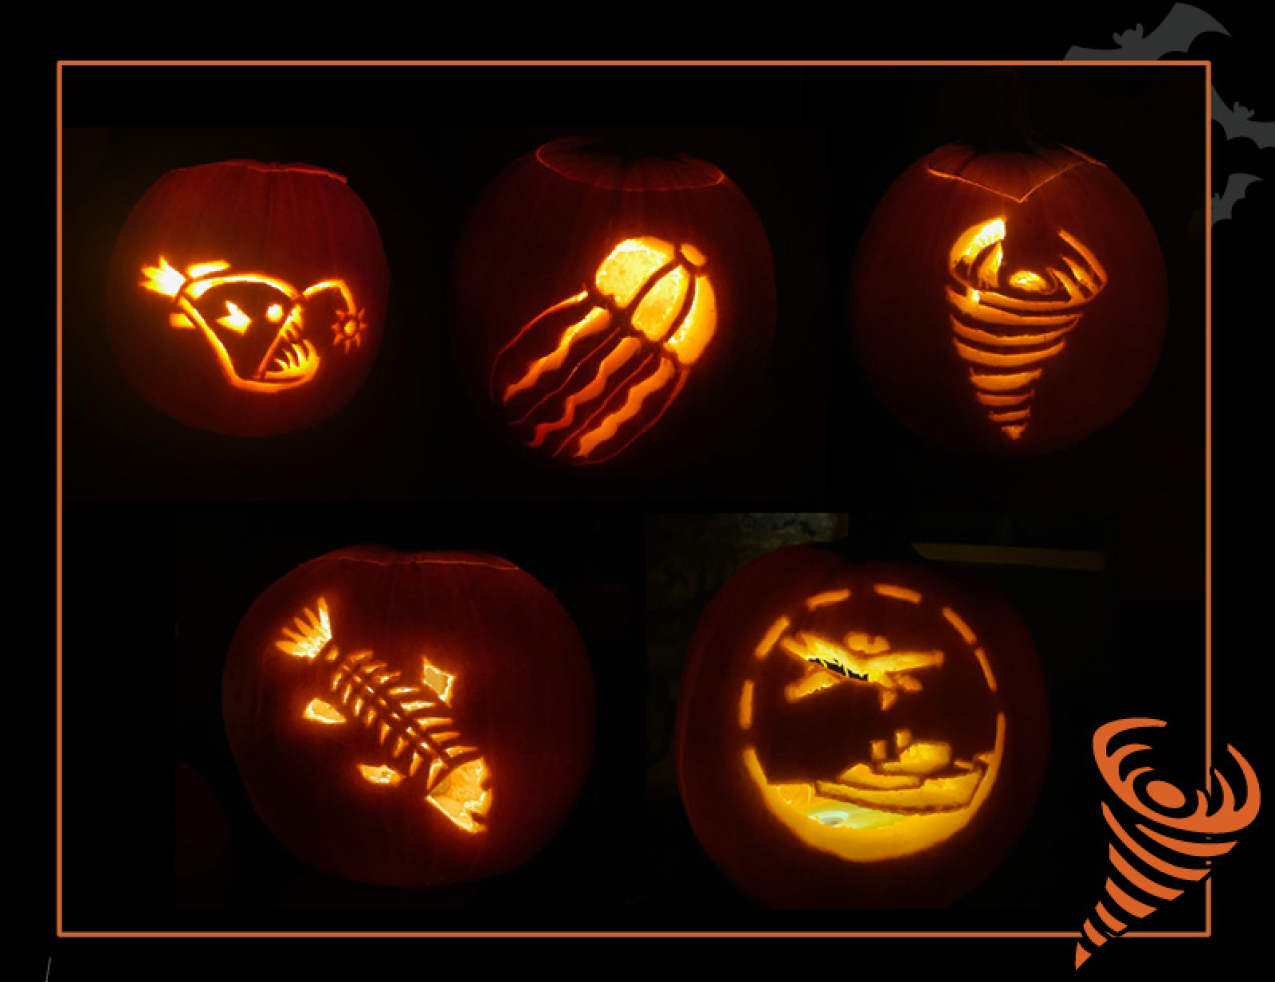 Five pumpkins carved with different NOAA-themed templates including an anglerfish, a jellyfish, a tornado, a bony fish, and a ship and plane. Border of the photo is black with orange atmospheric graphics of a tornado. Text: pumpkin carving templates, #NOAASpookyScience with NOAA logo.